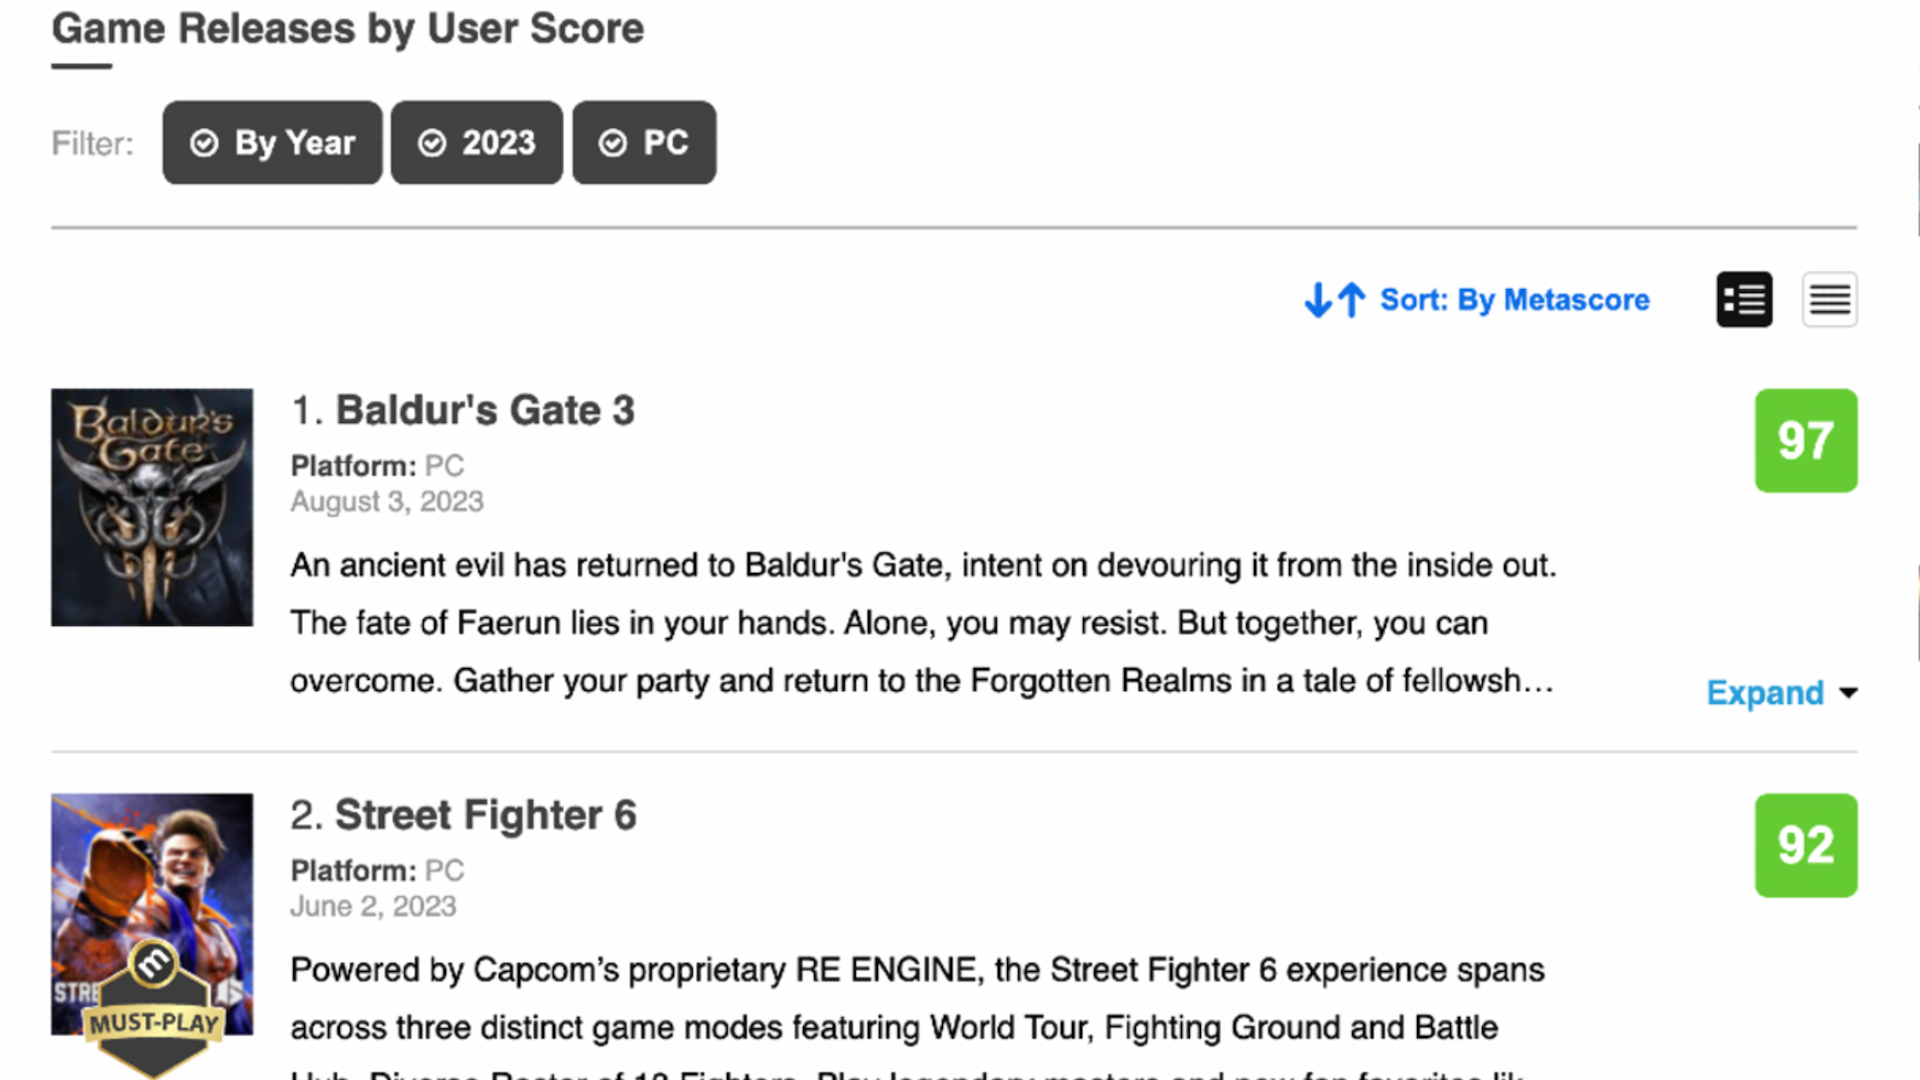 A screenshot of Baldur's Gate 3 being the top rated game on Metacritic by score